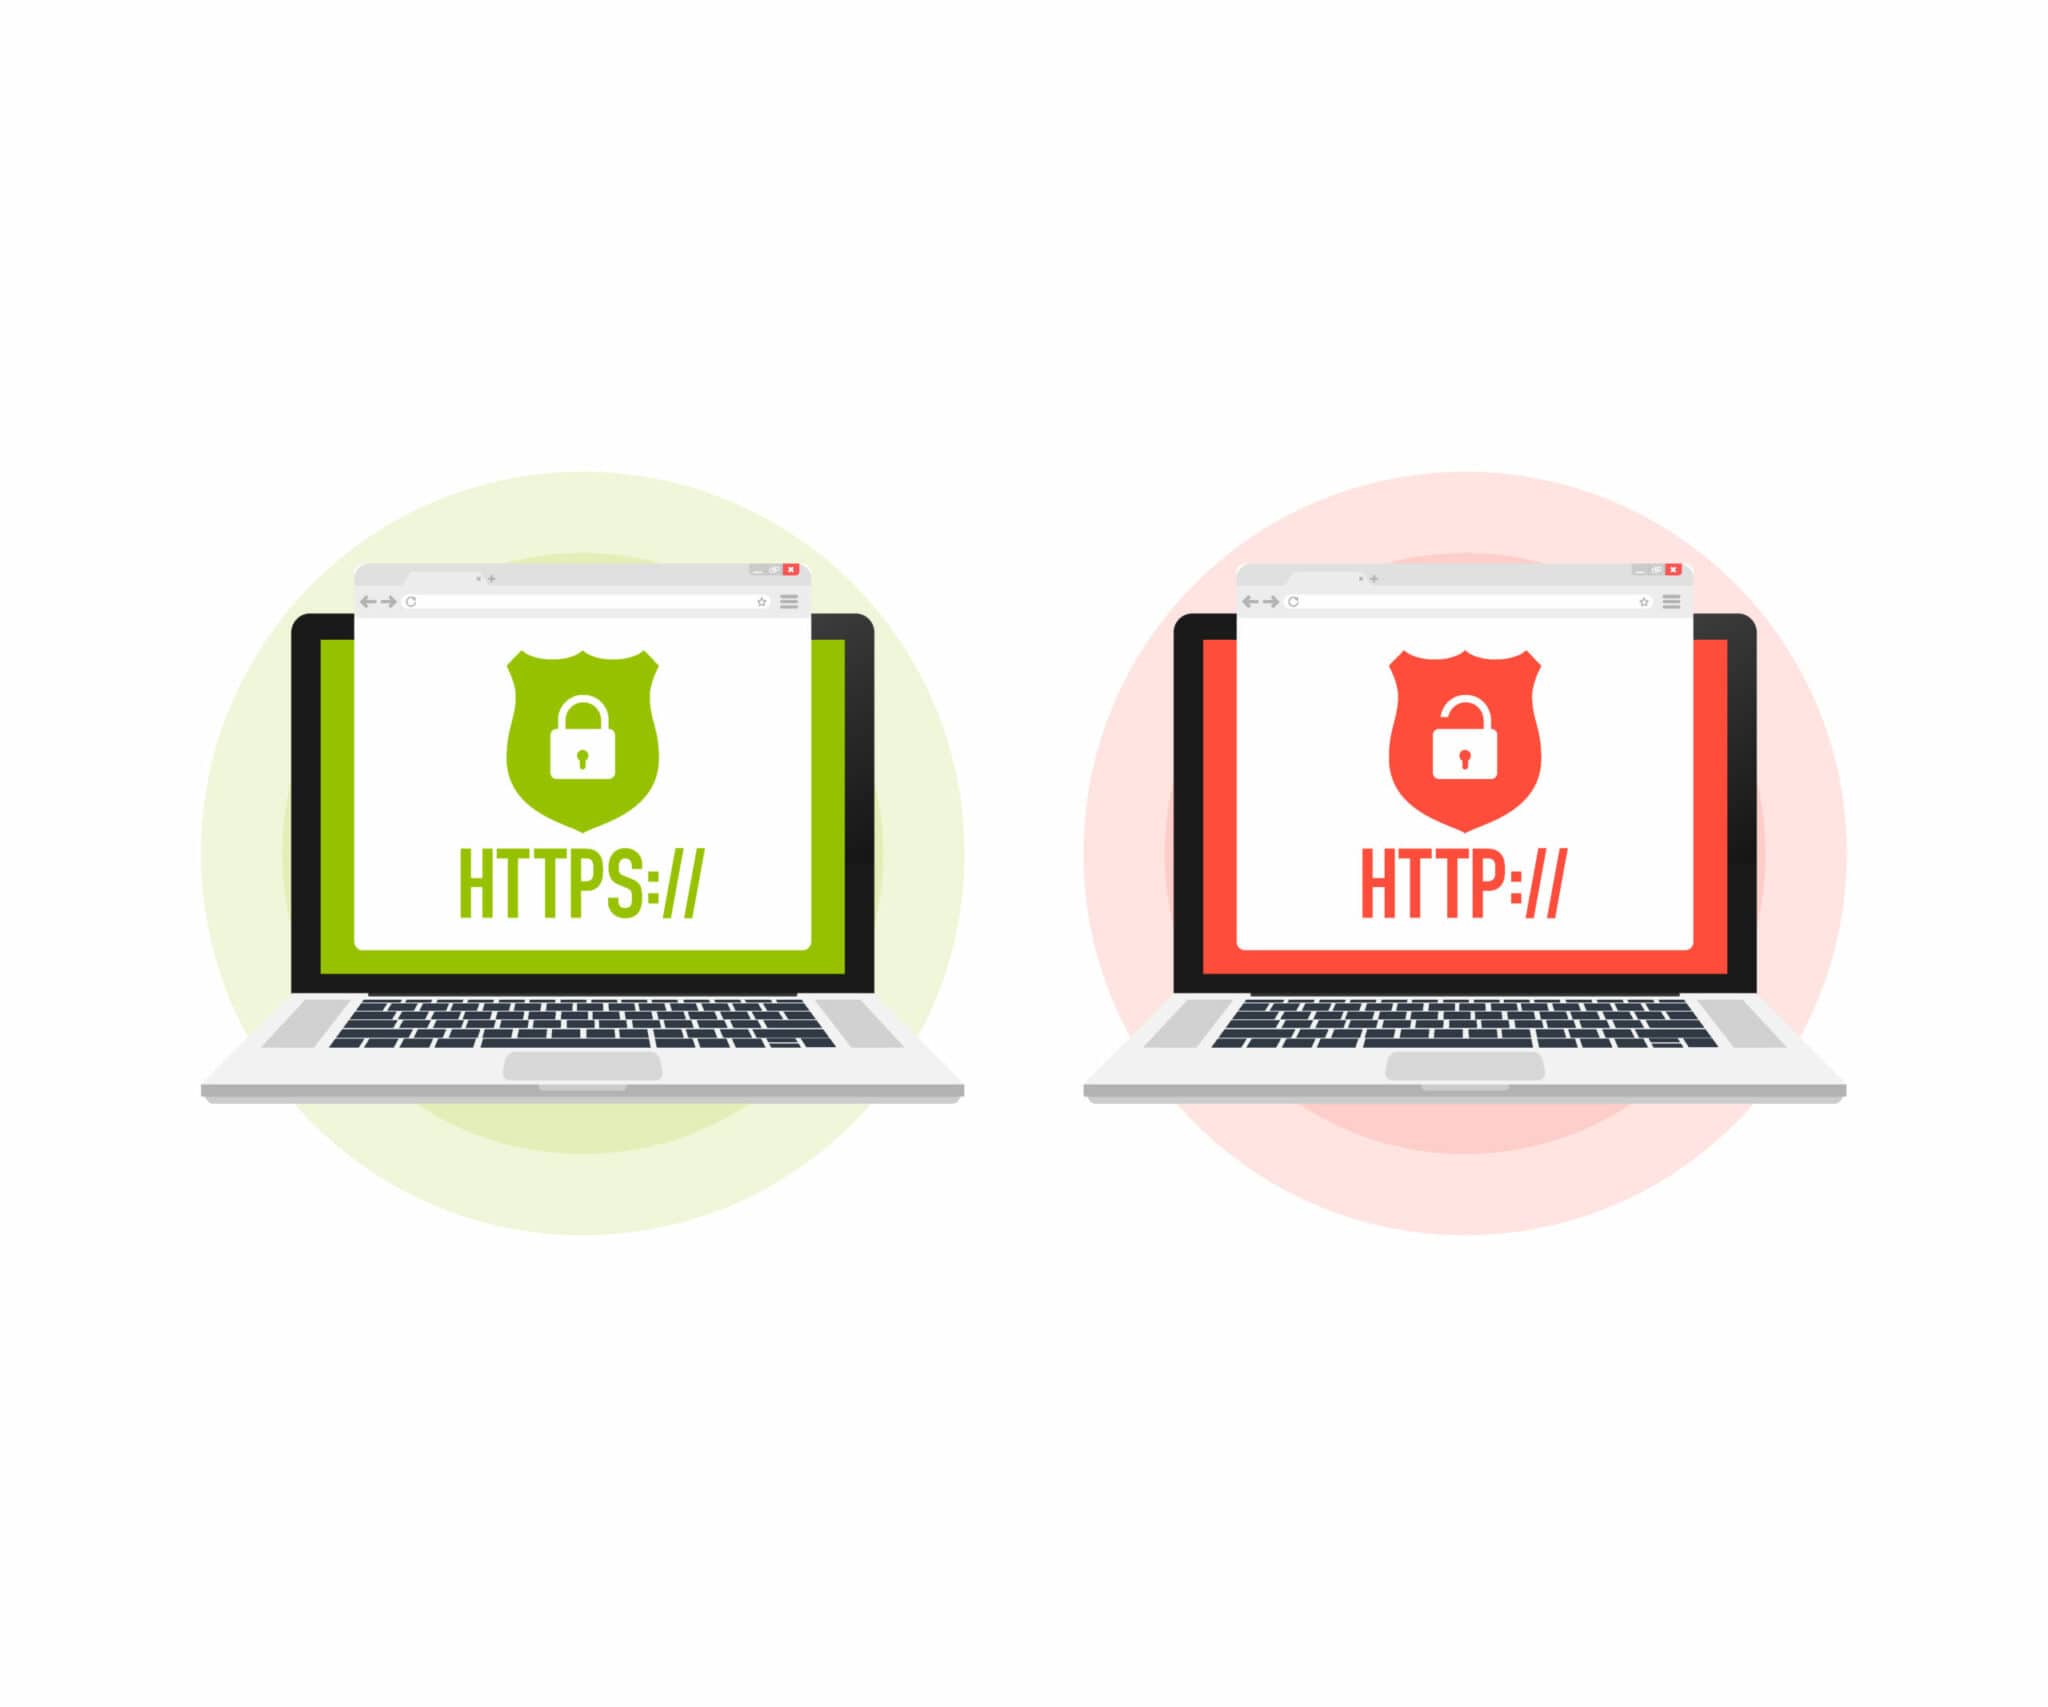 http and https protocols on shield on laptop, on white background. Vector illustration